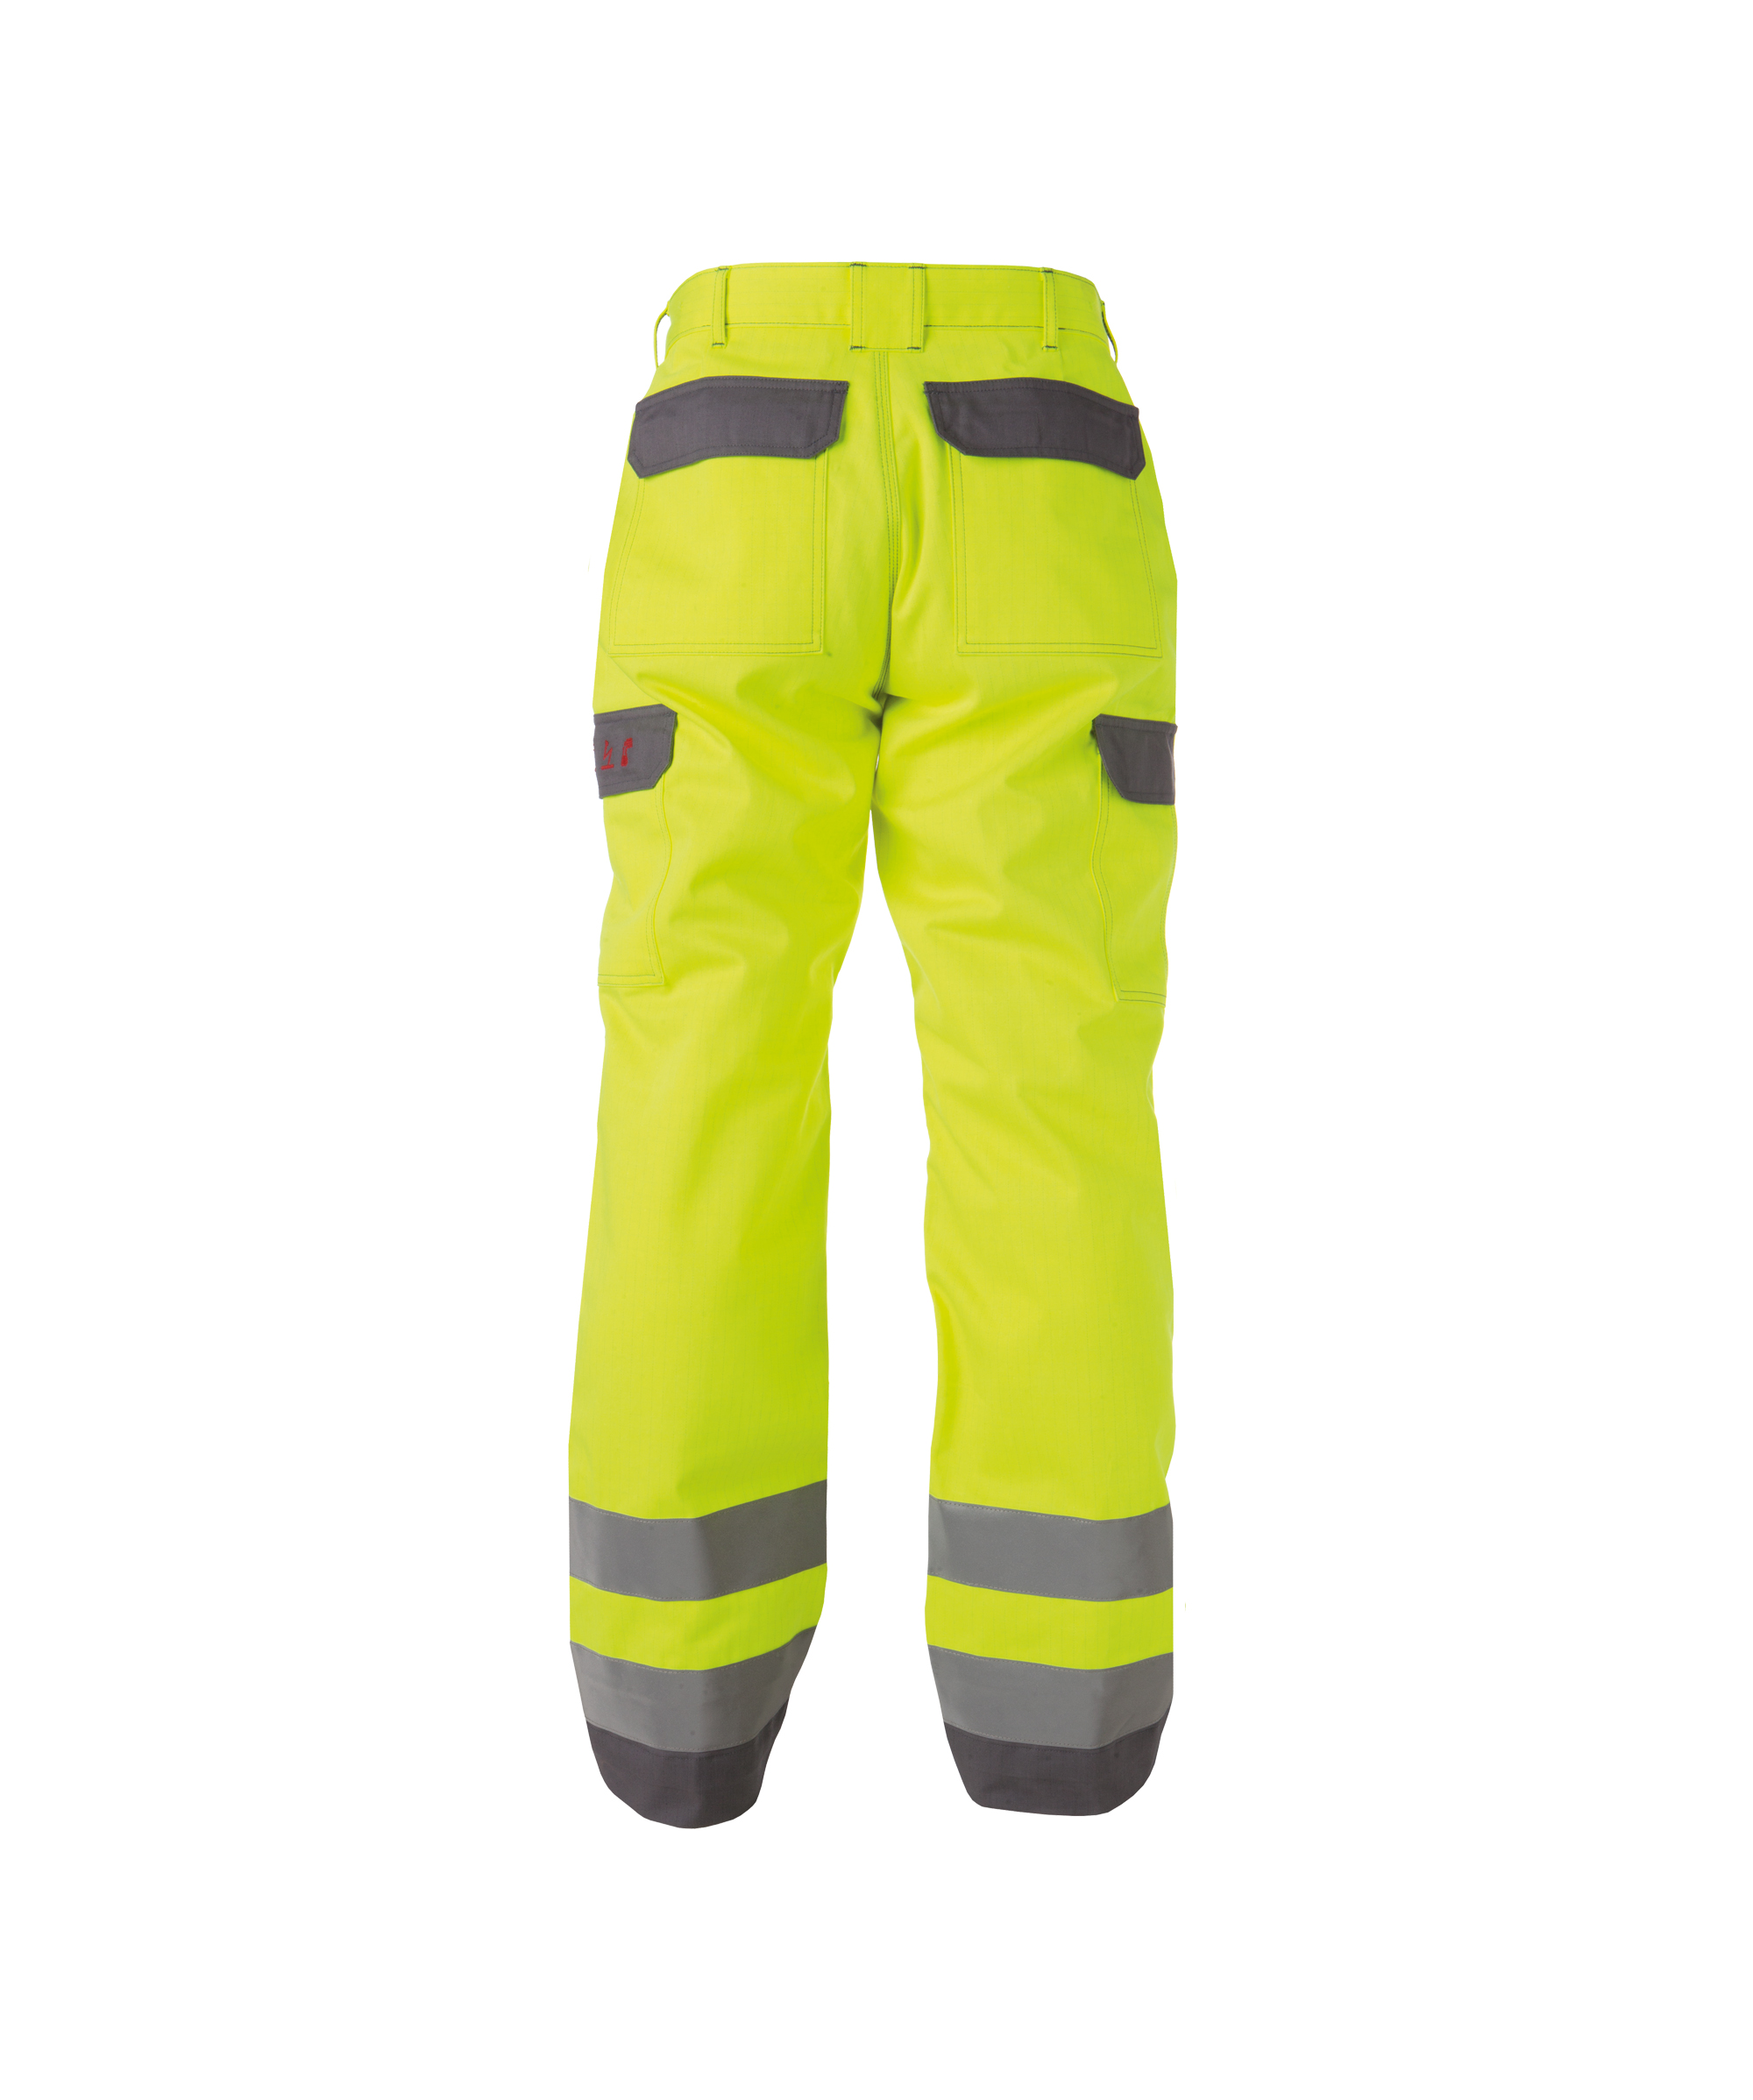 manchester_two-tone-multinorm-high-visibility-work-trousers-with-knee-pockets_fluo-yellow-graphite-grey_back.jpg